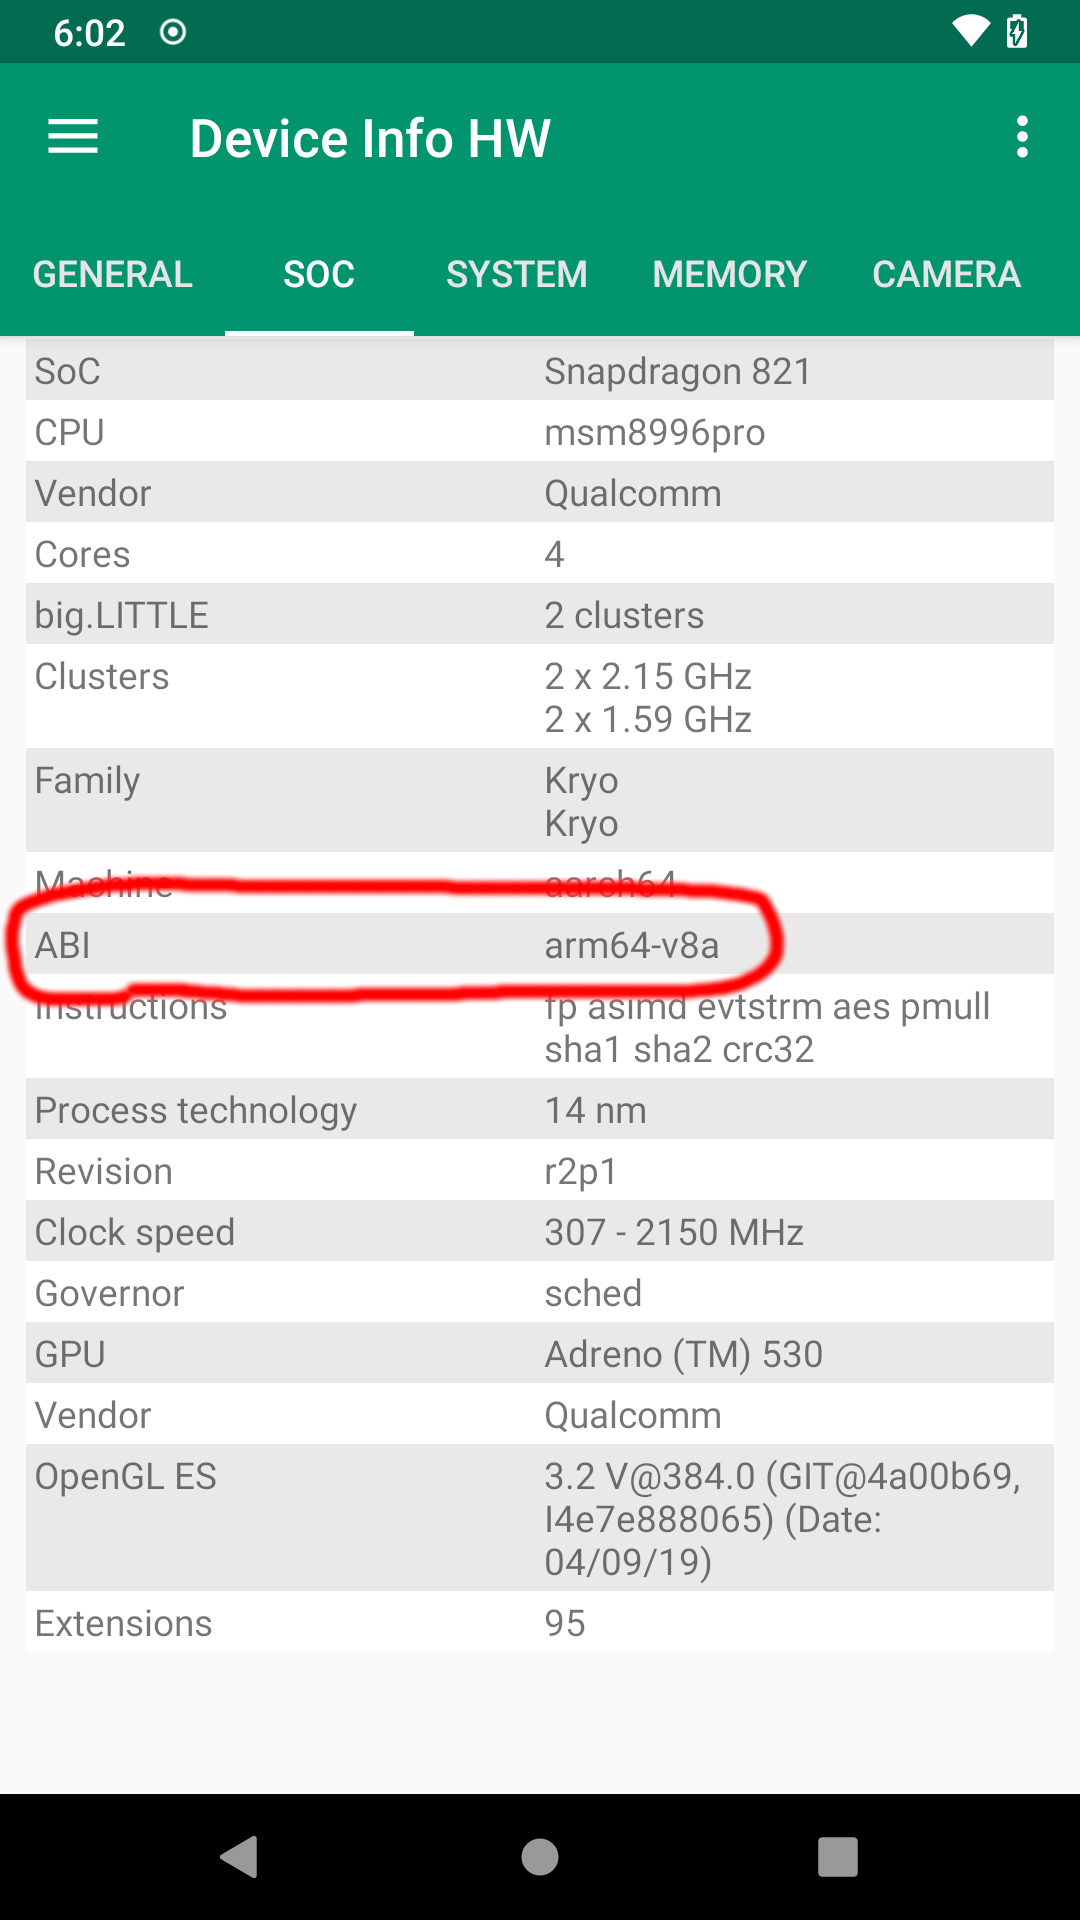 The SoC page in Device Info HW, with the ABI settings circled in red.